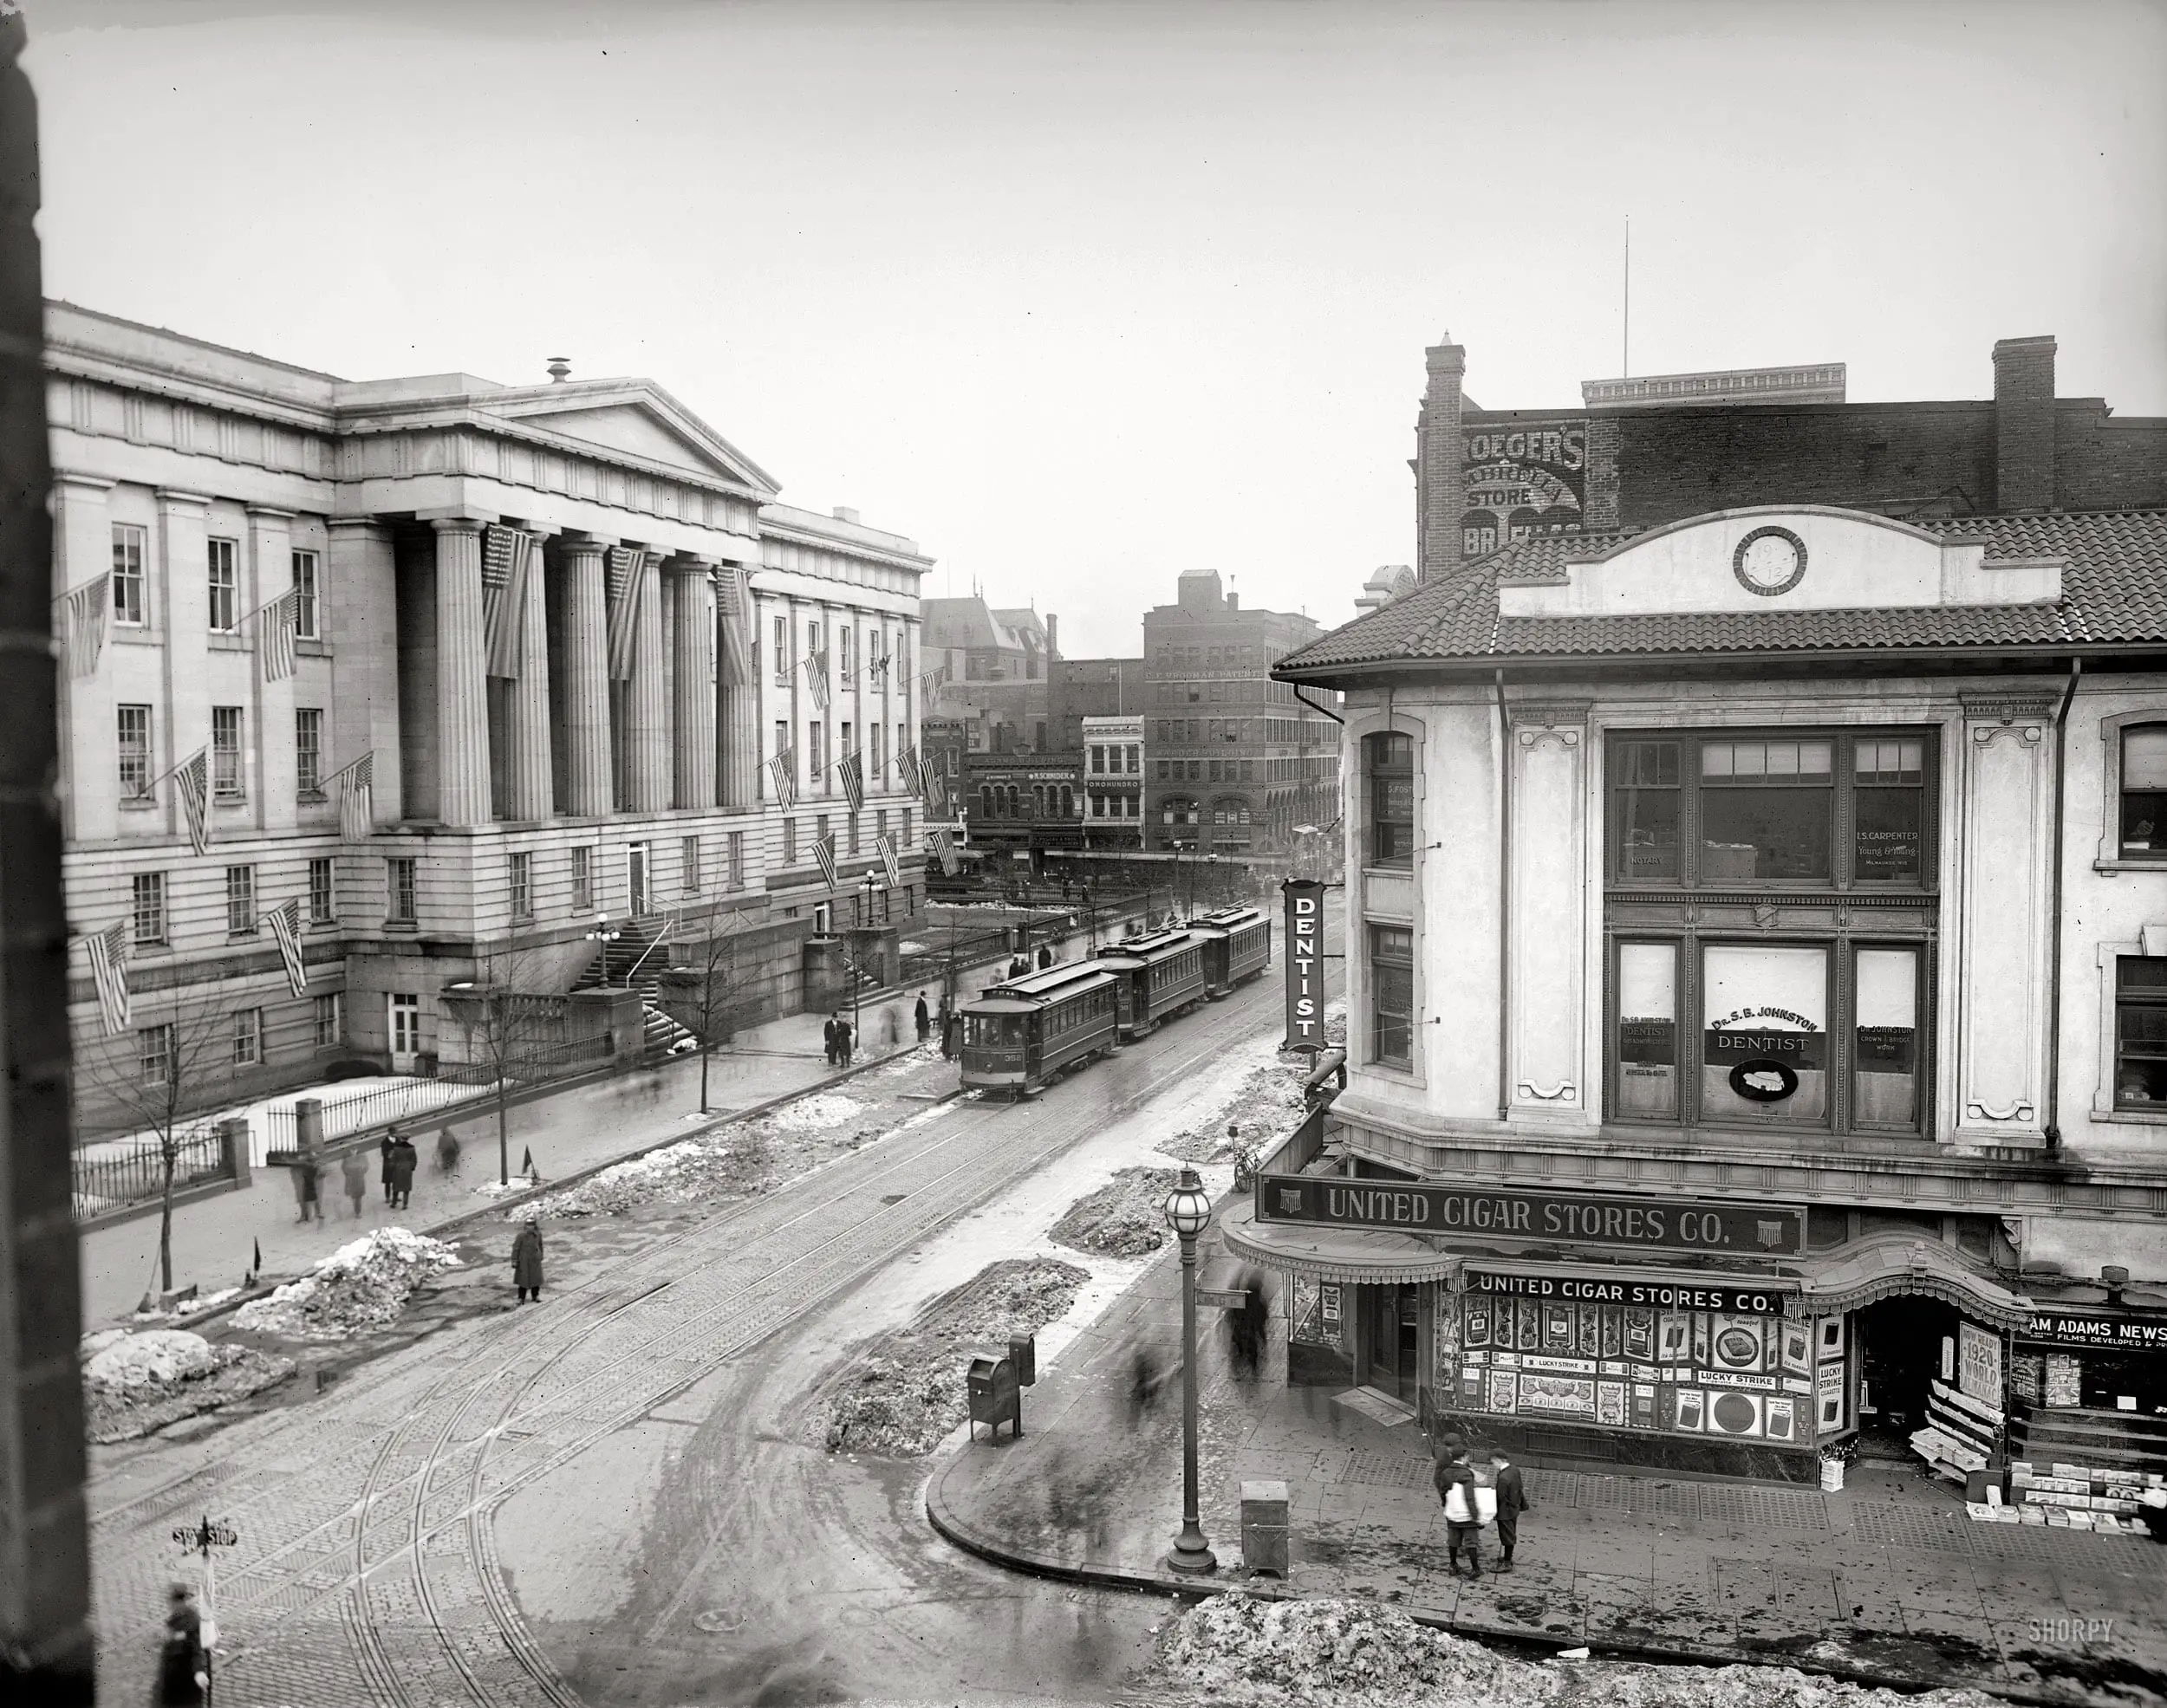 9th and G St. NW in 1919 (Shorpy)